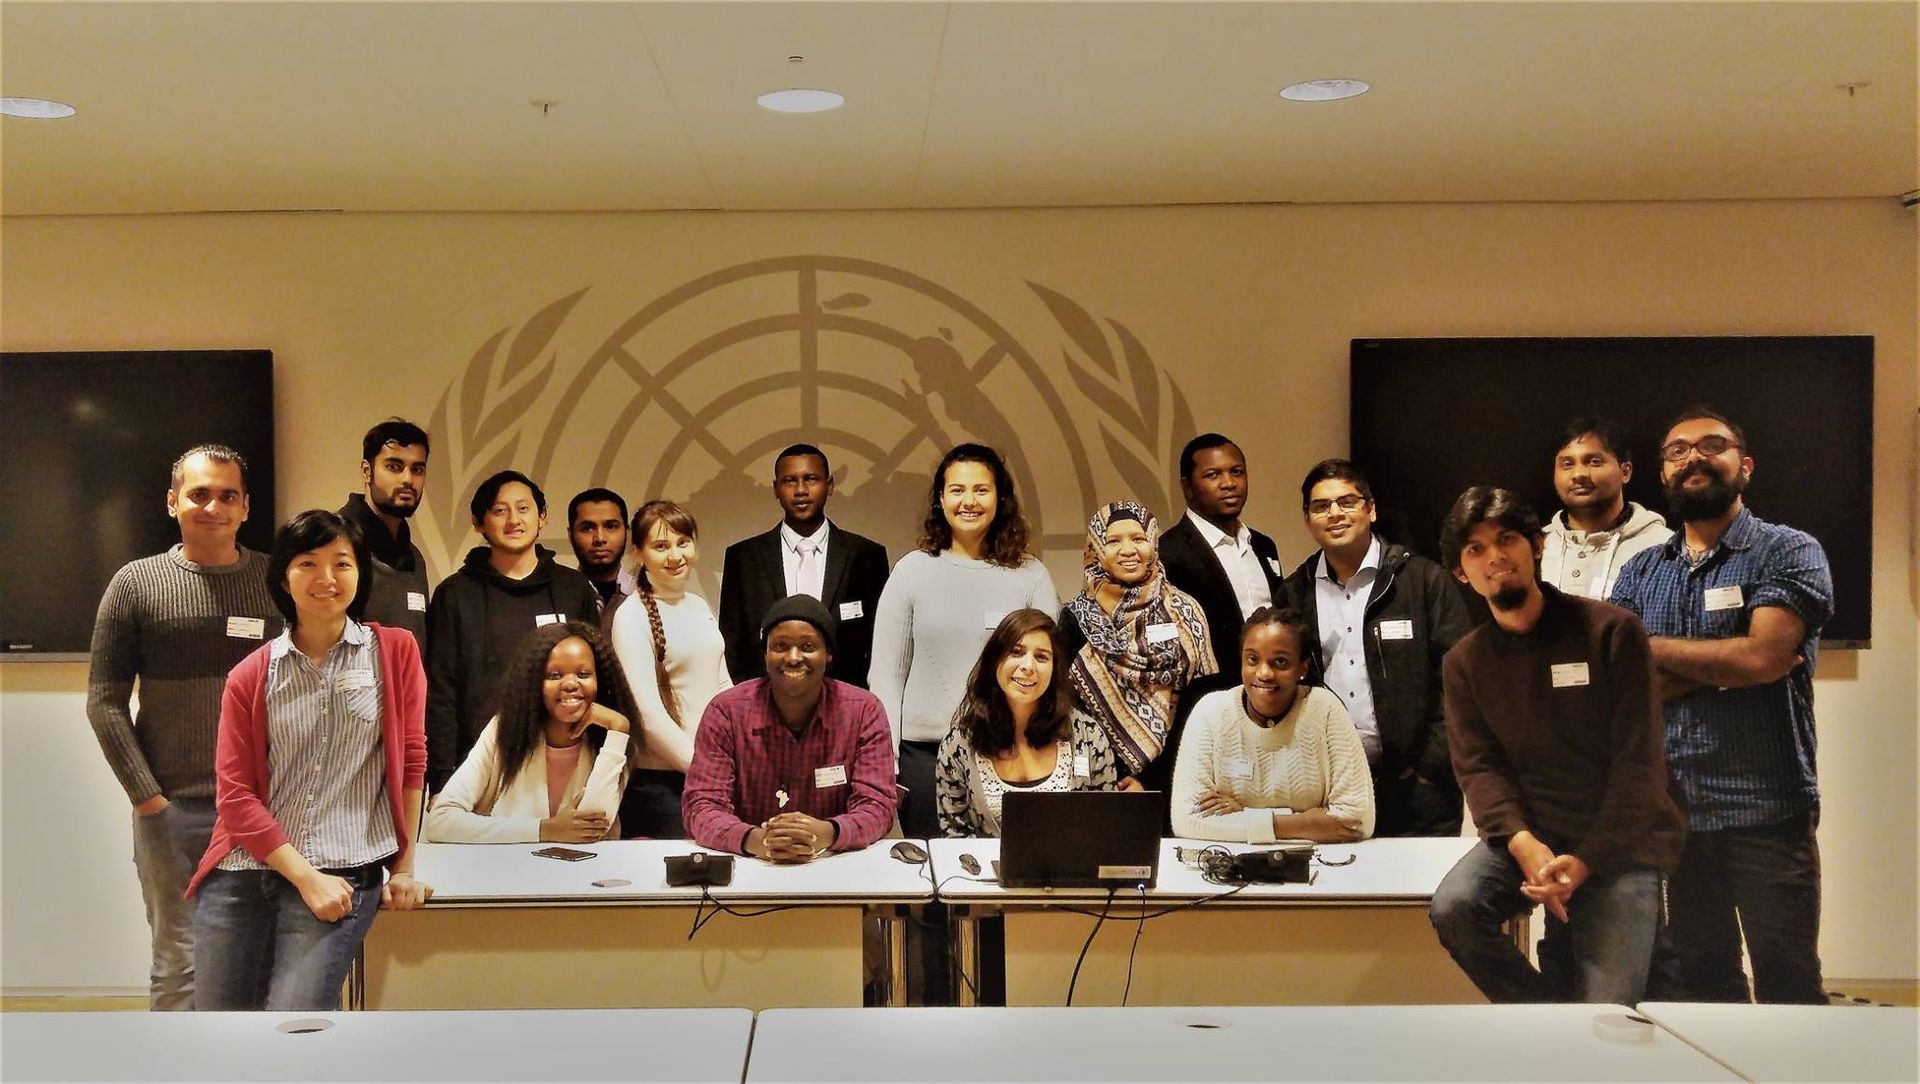 NFGP members posing for a photo at the UN City in Copenhagen, Denmark. Career visits are one of the SI scholarship benefits